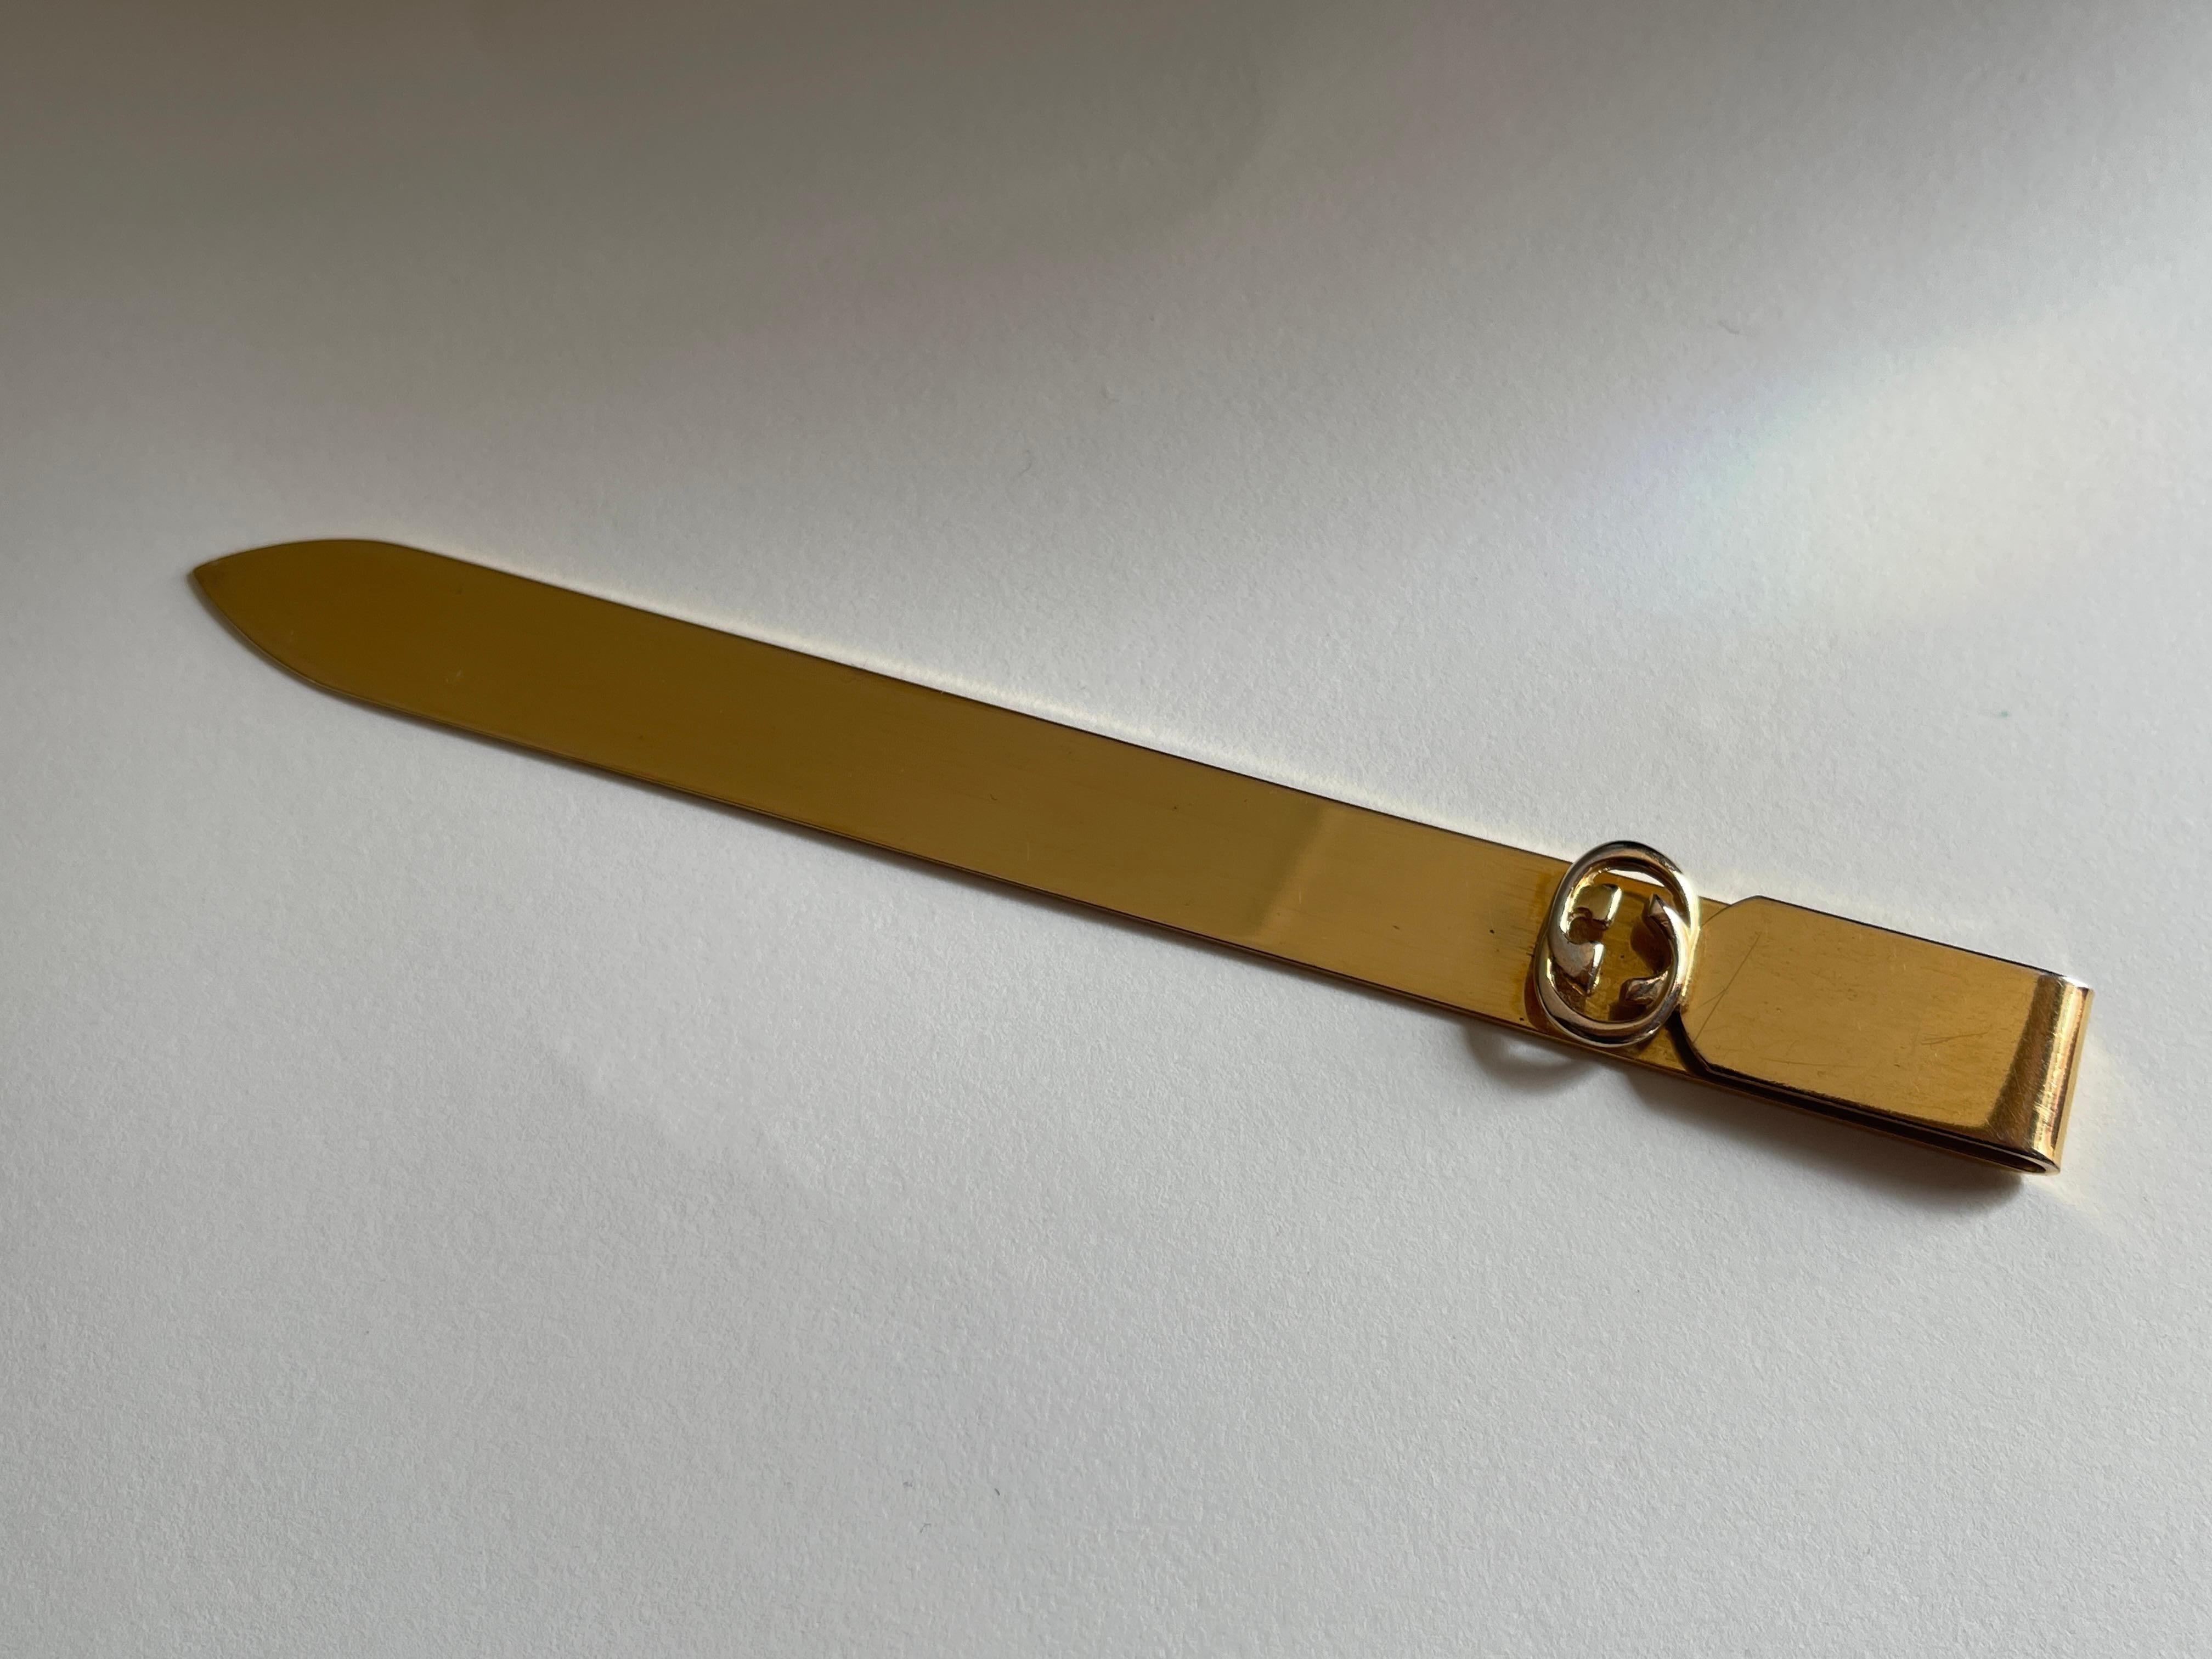 20th Century Gucci Gold Metal Letter Opener in Black Leather Case For Sale